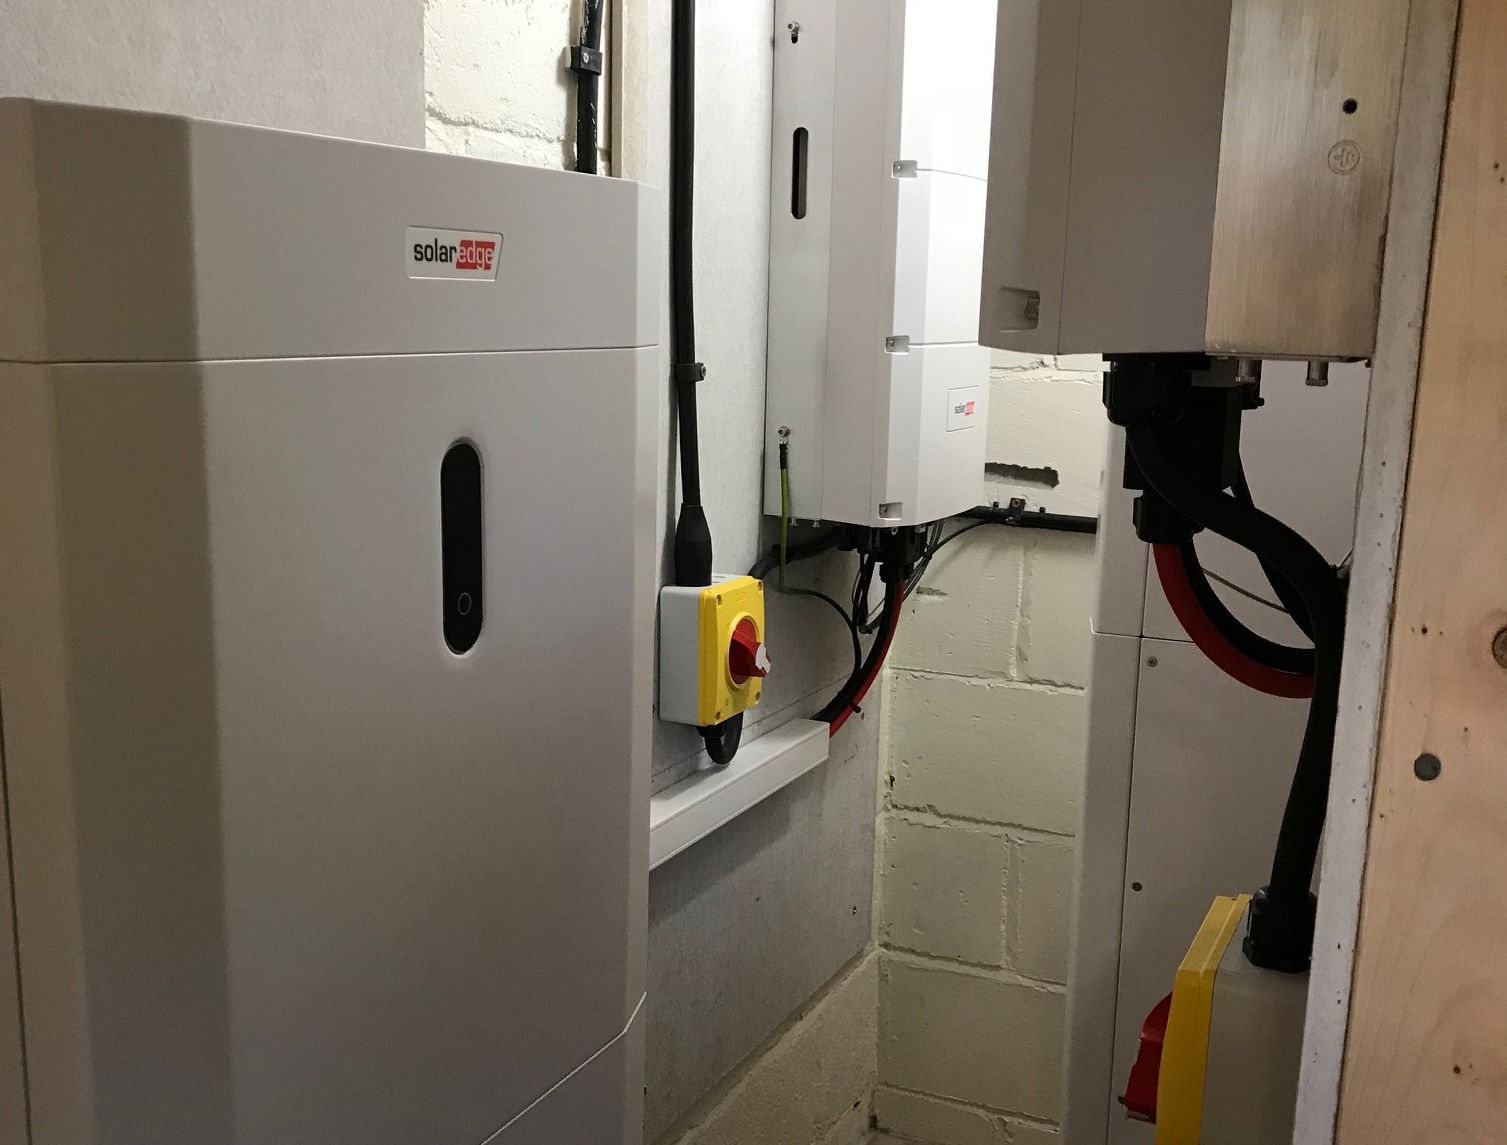 Picture of the batteries installed in Henfield hall storage area